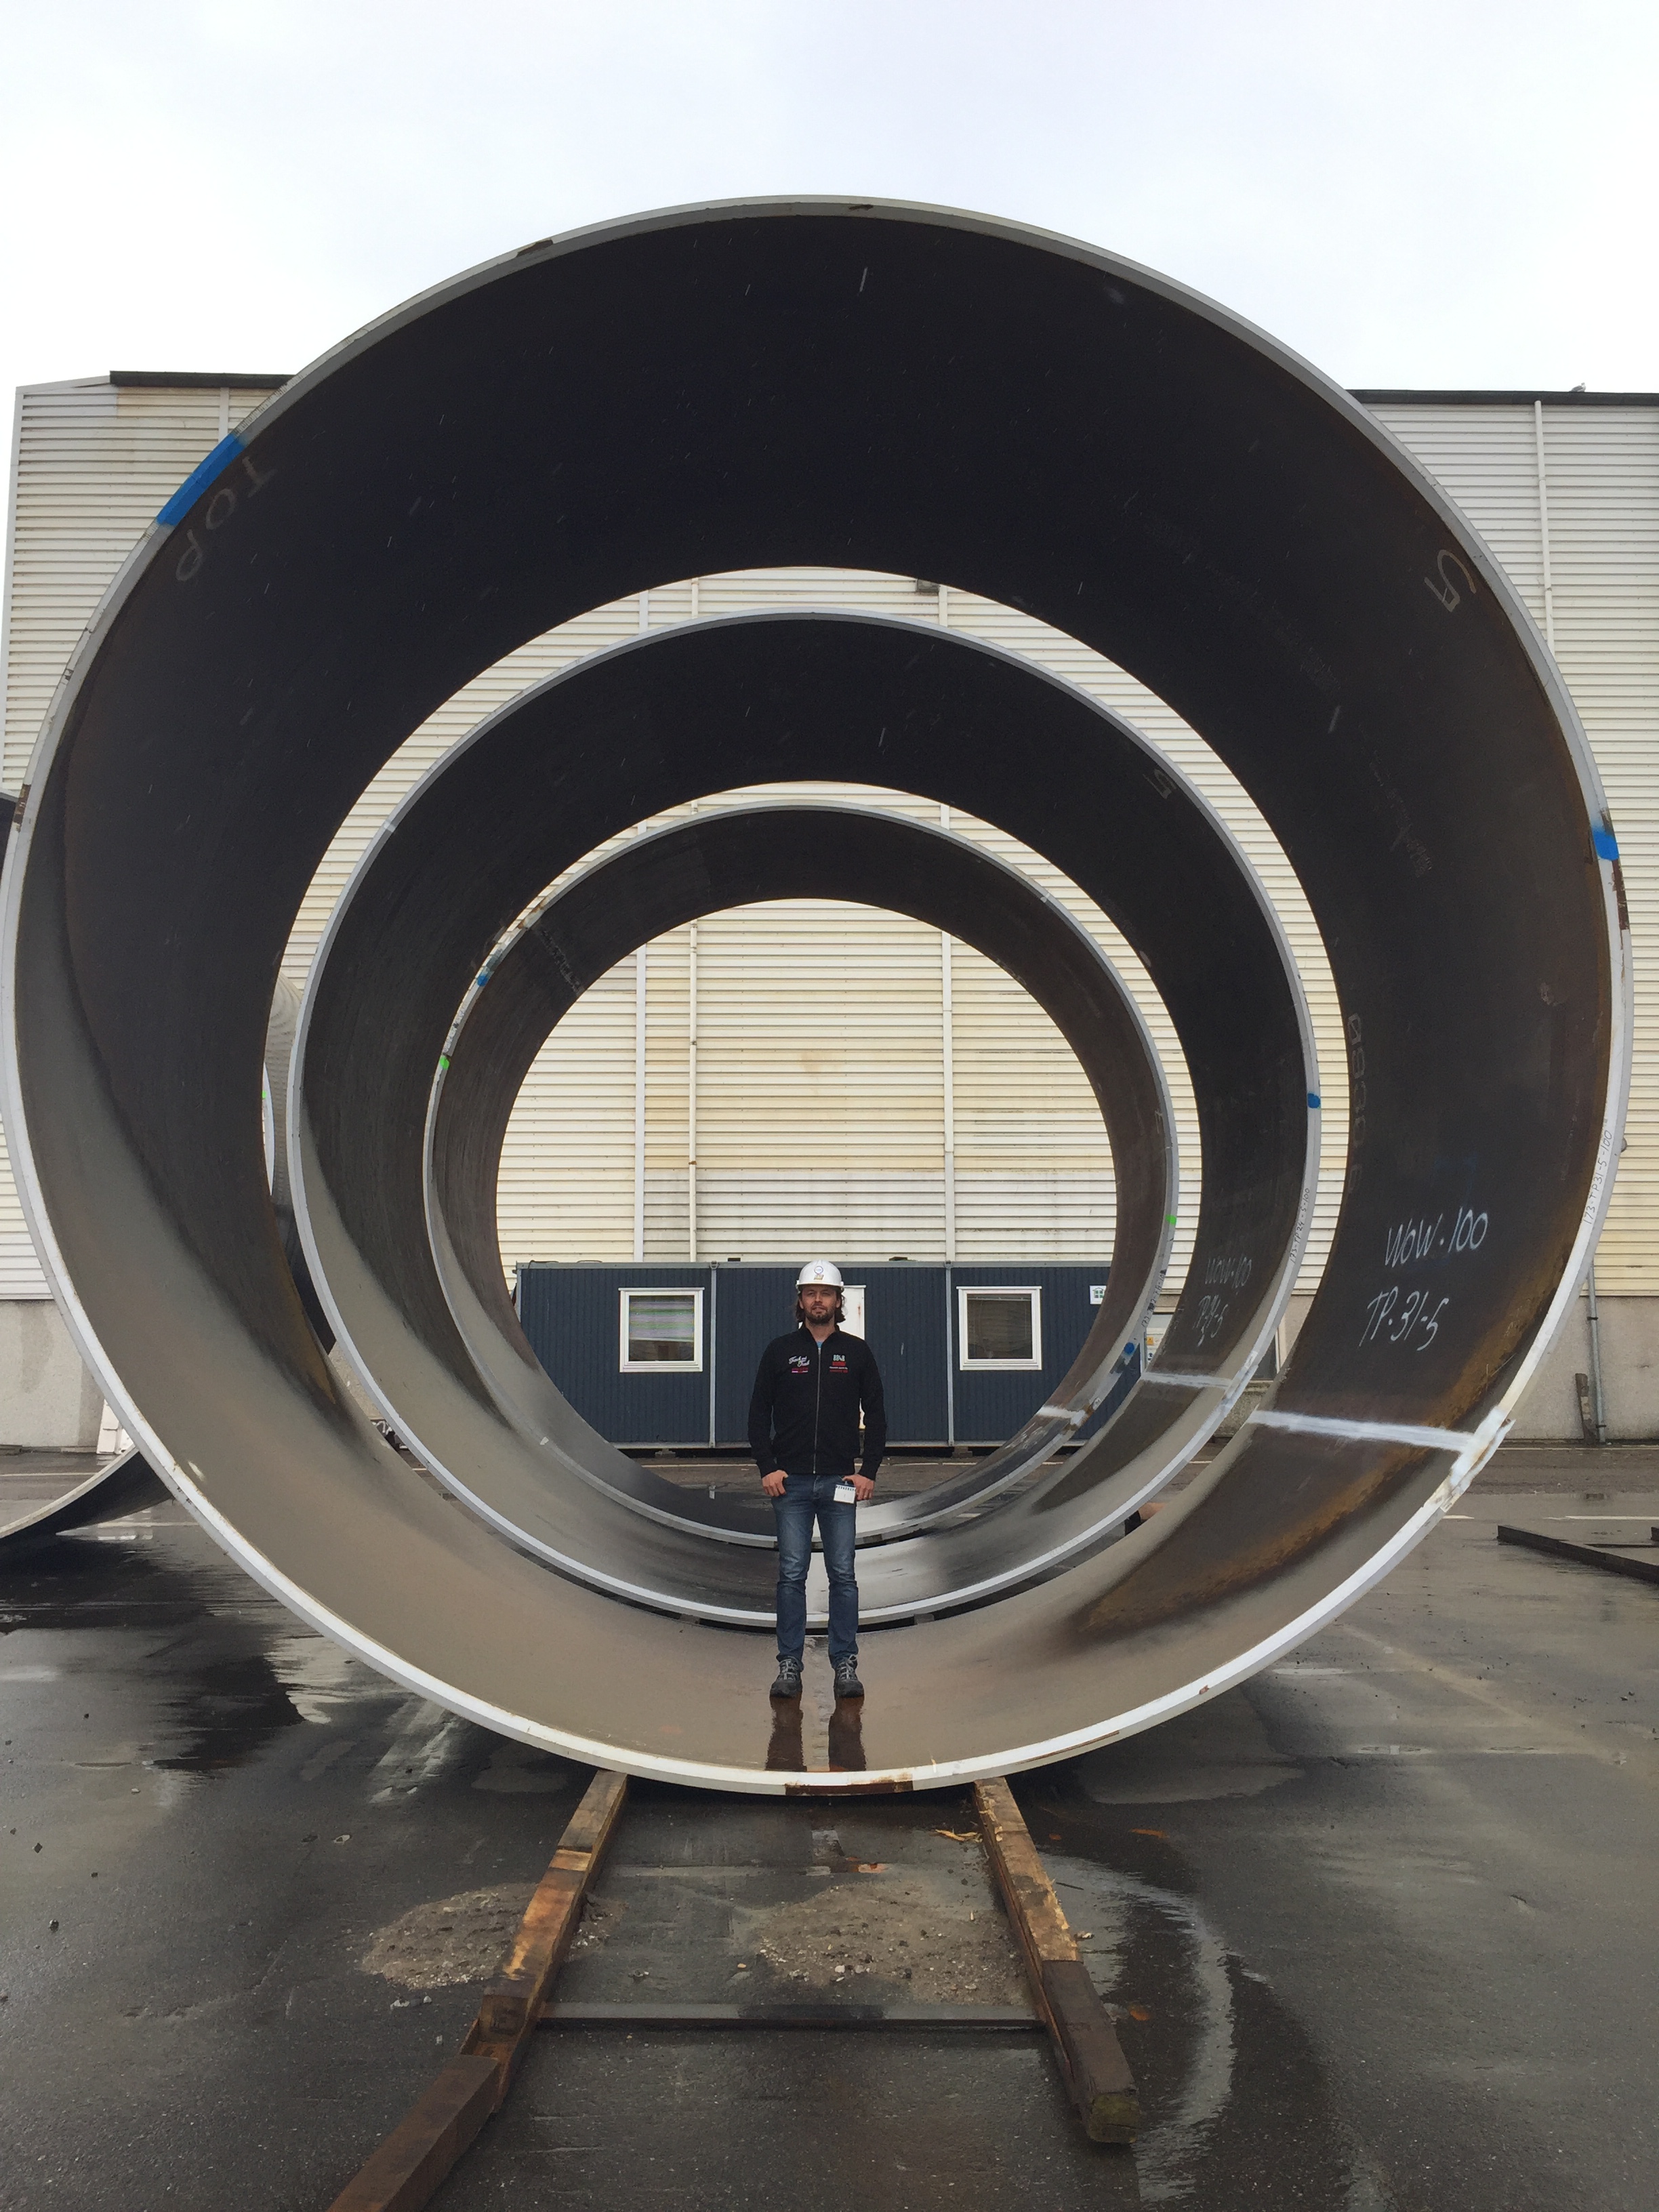 Andreassen demonstrates the enormity of each steel section used to build the monopile foundation in which circumferential welds are used to fuse them together. (Image credit: Louis Andersen)